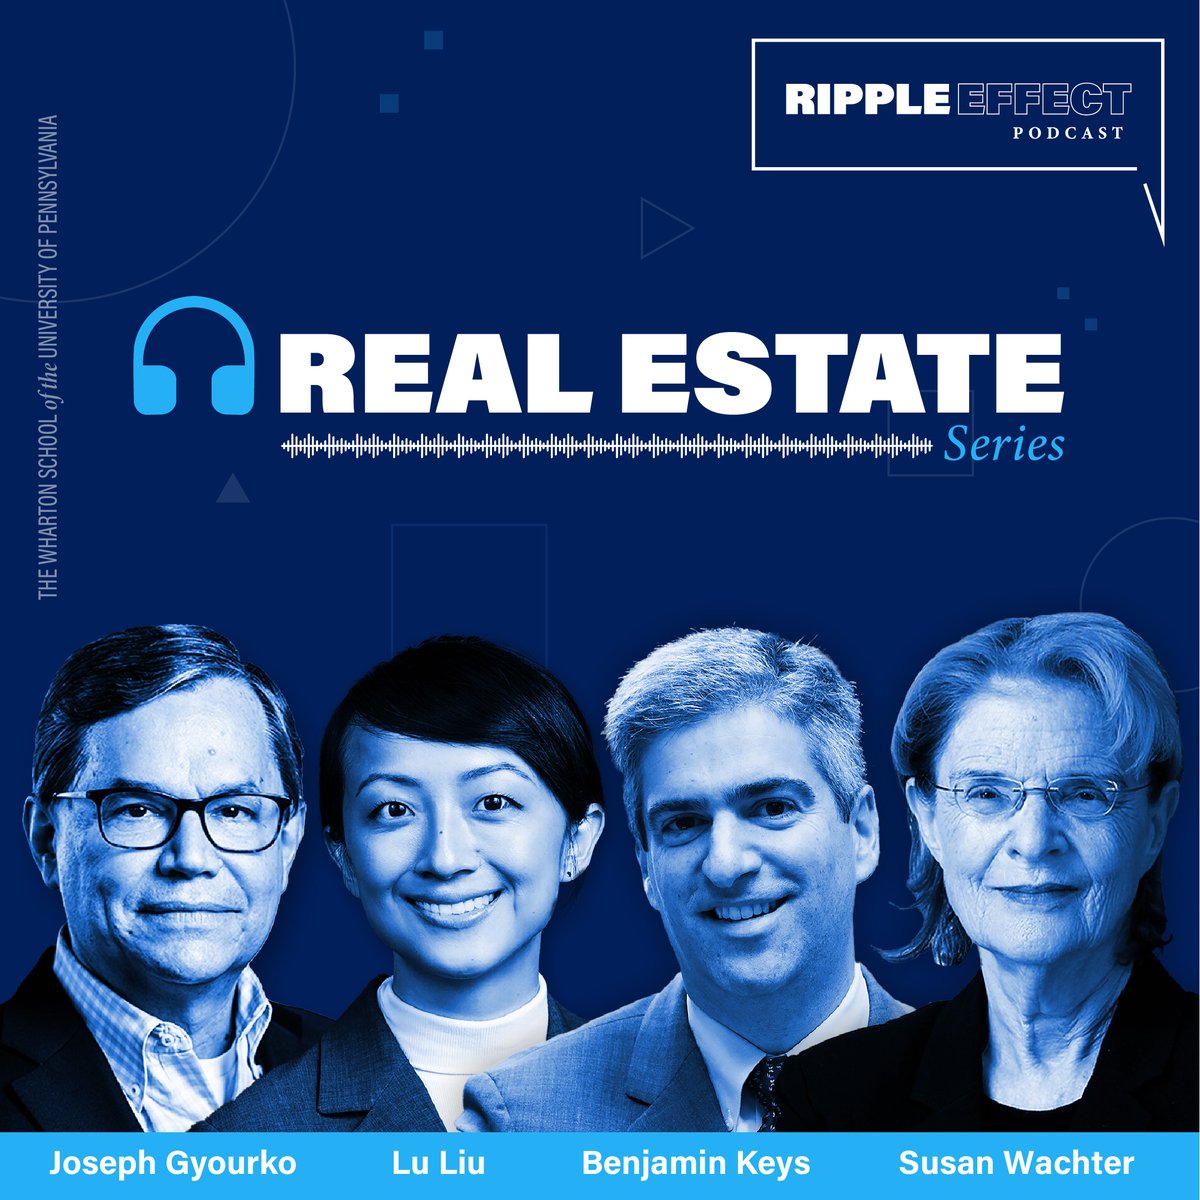 When will mortgage rates drop? What else would lower housing prices? @Wharton professors Joe Gyourko, @luliu_fin, @Key_Z_E & @Susan_Wachter discuss real estate in our next Ripple Effect podcast series. Stay tuned for episodes every Tuesday this month: whr.tn/rippleeffect